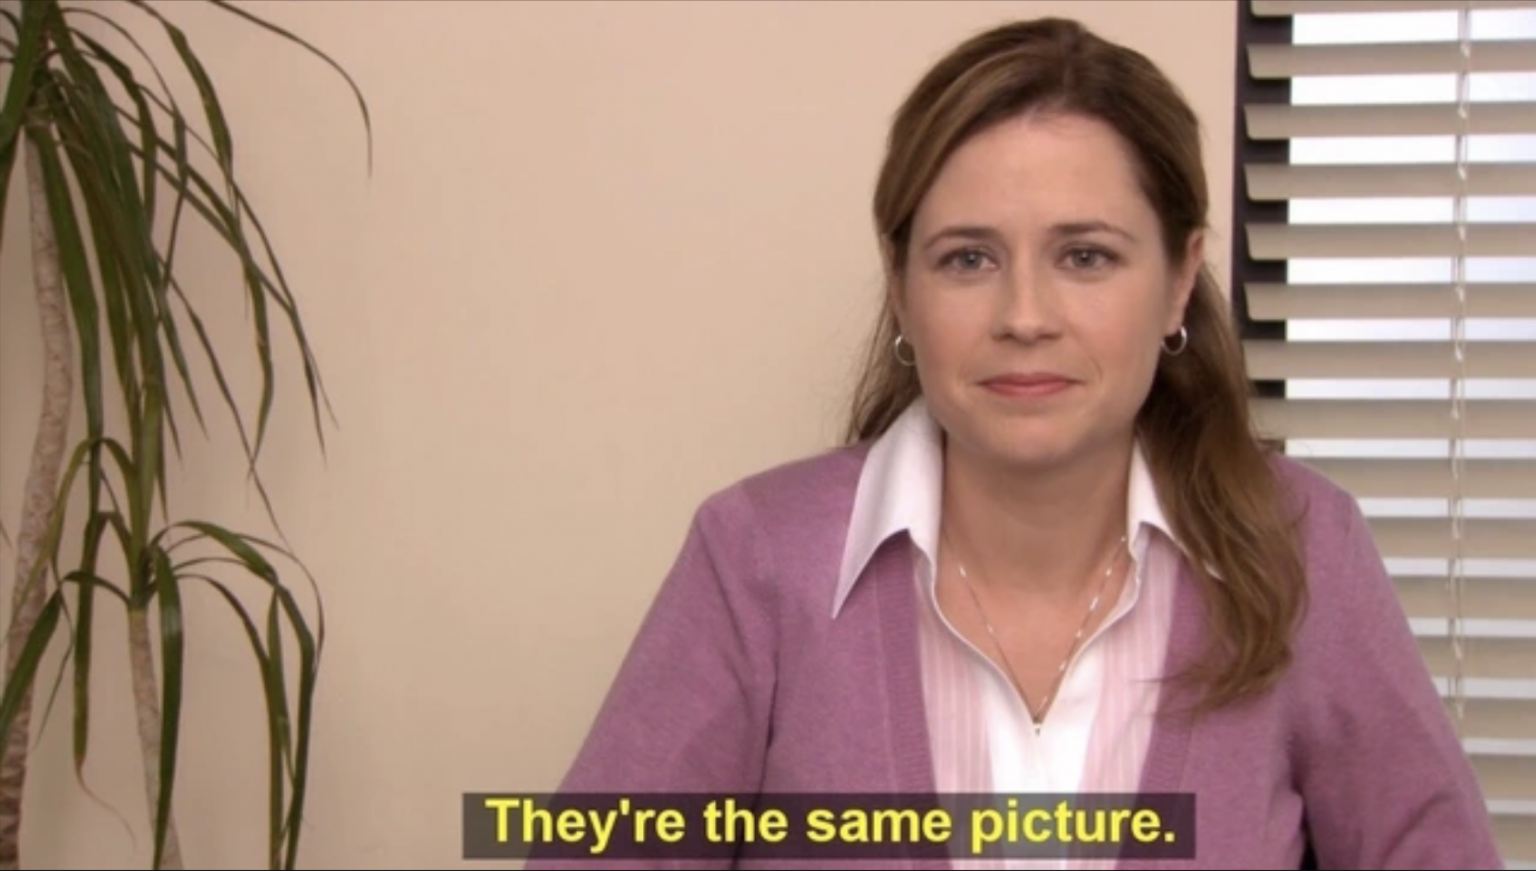 theyre-the-same-picture-pam-the-office-meme-1536x871.png